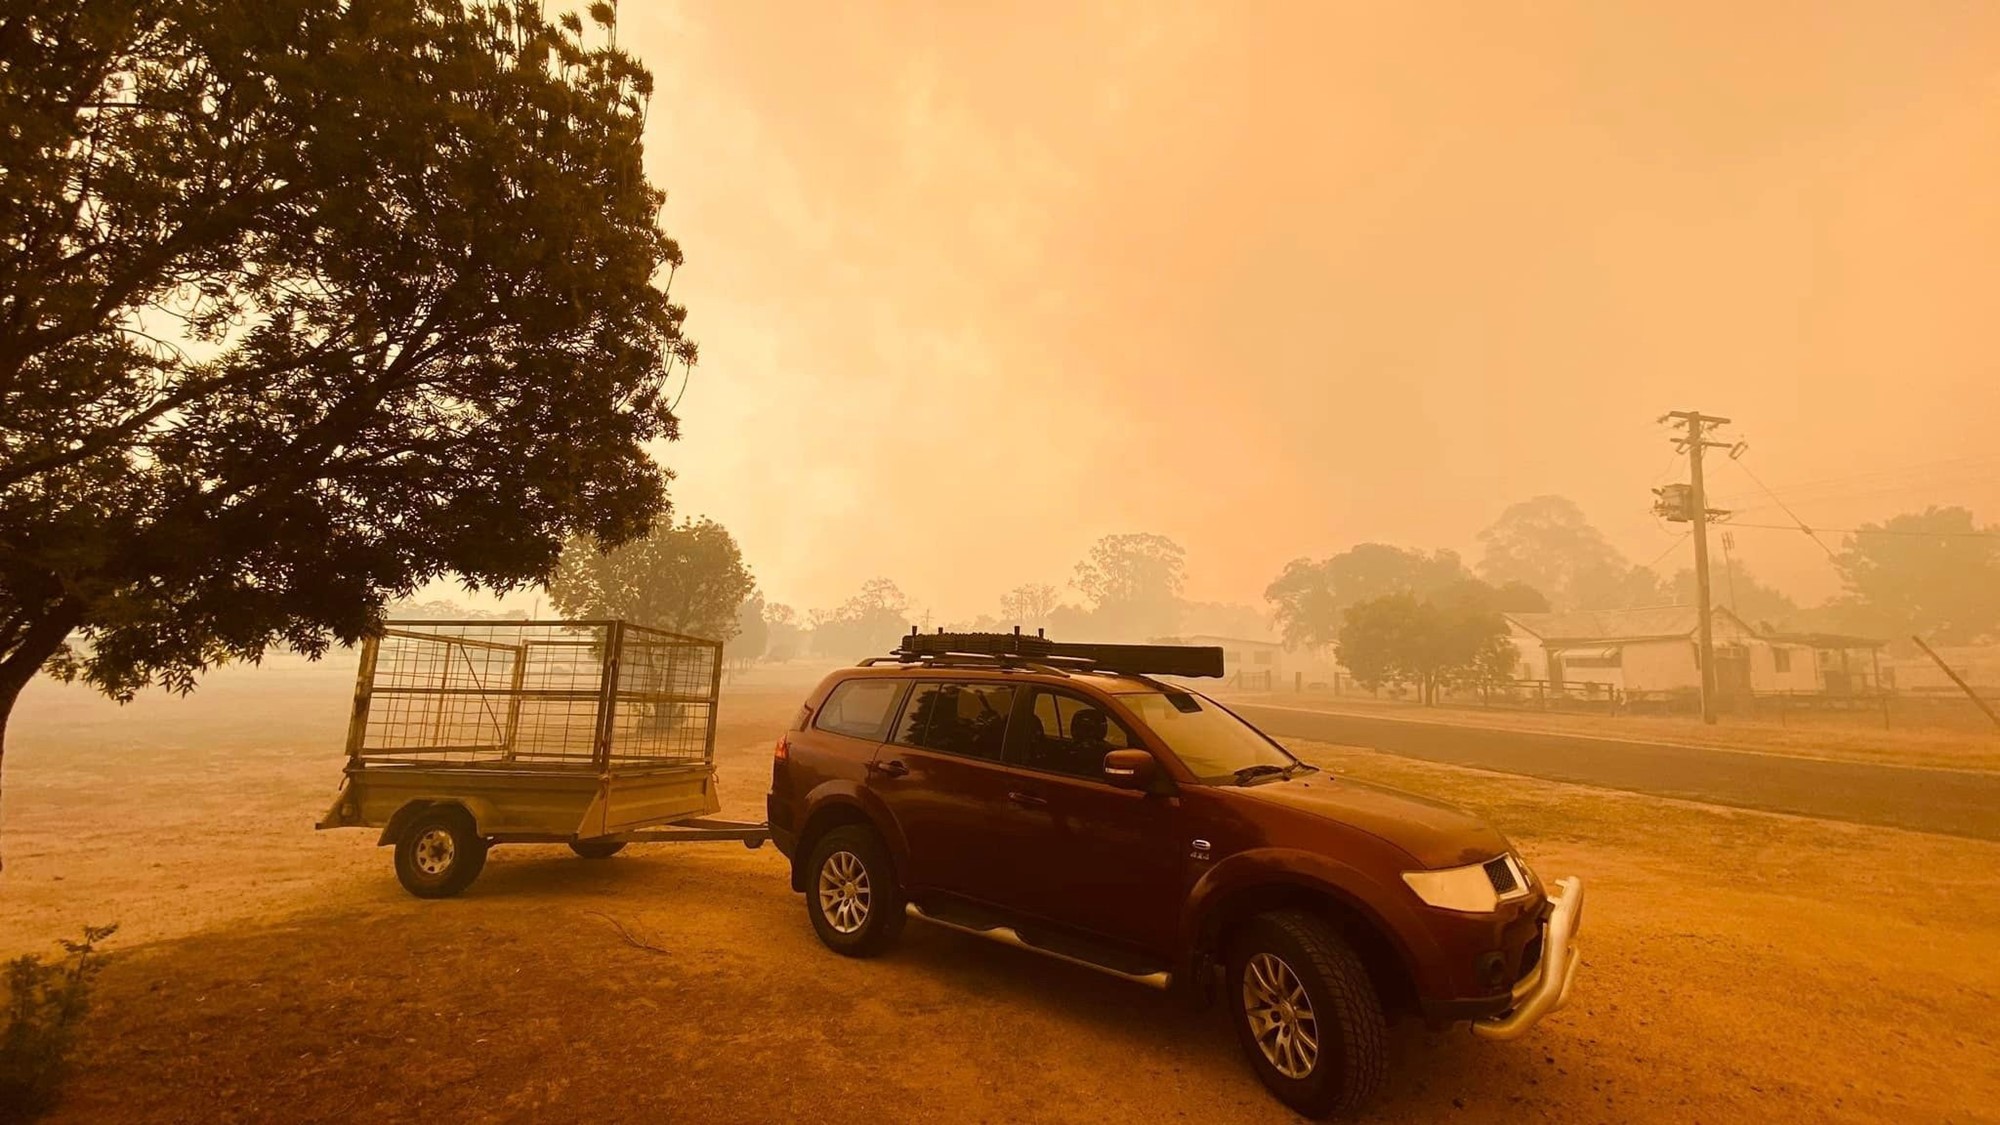 a car with a trailer parked under a tree beside a rural road, the sky is orange and there is bushfire smoke everywhere